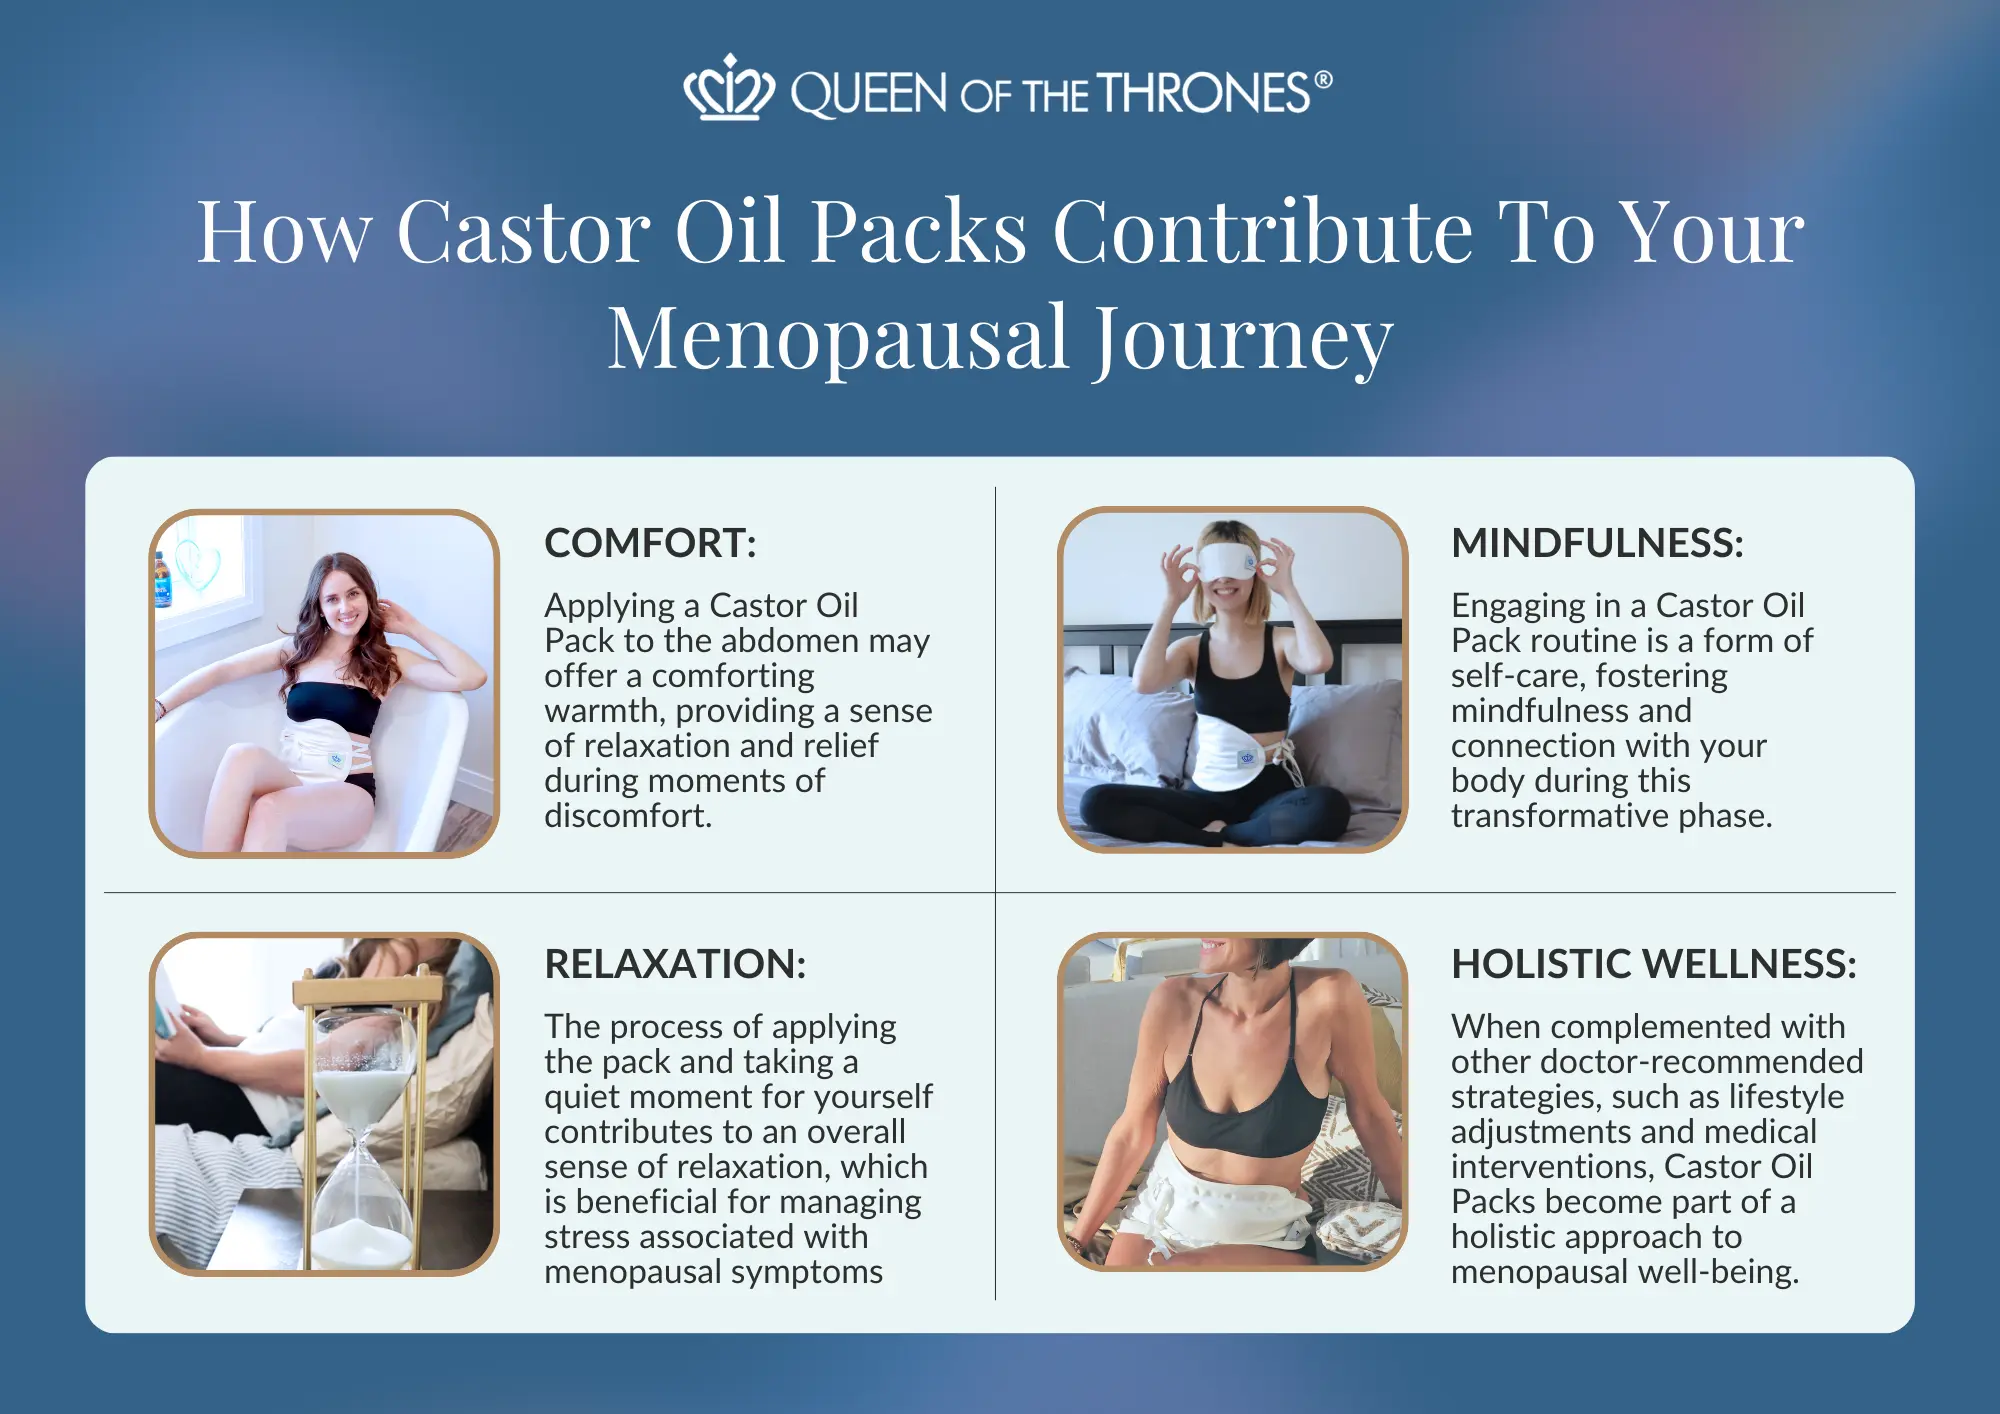 Queen of the Thrones Castor oil packs and your menopausal journey